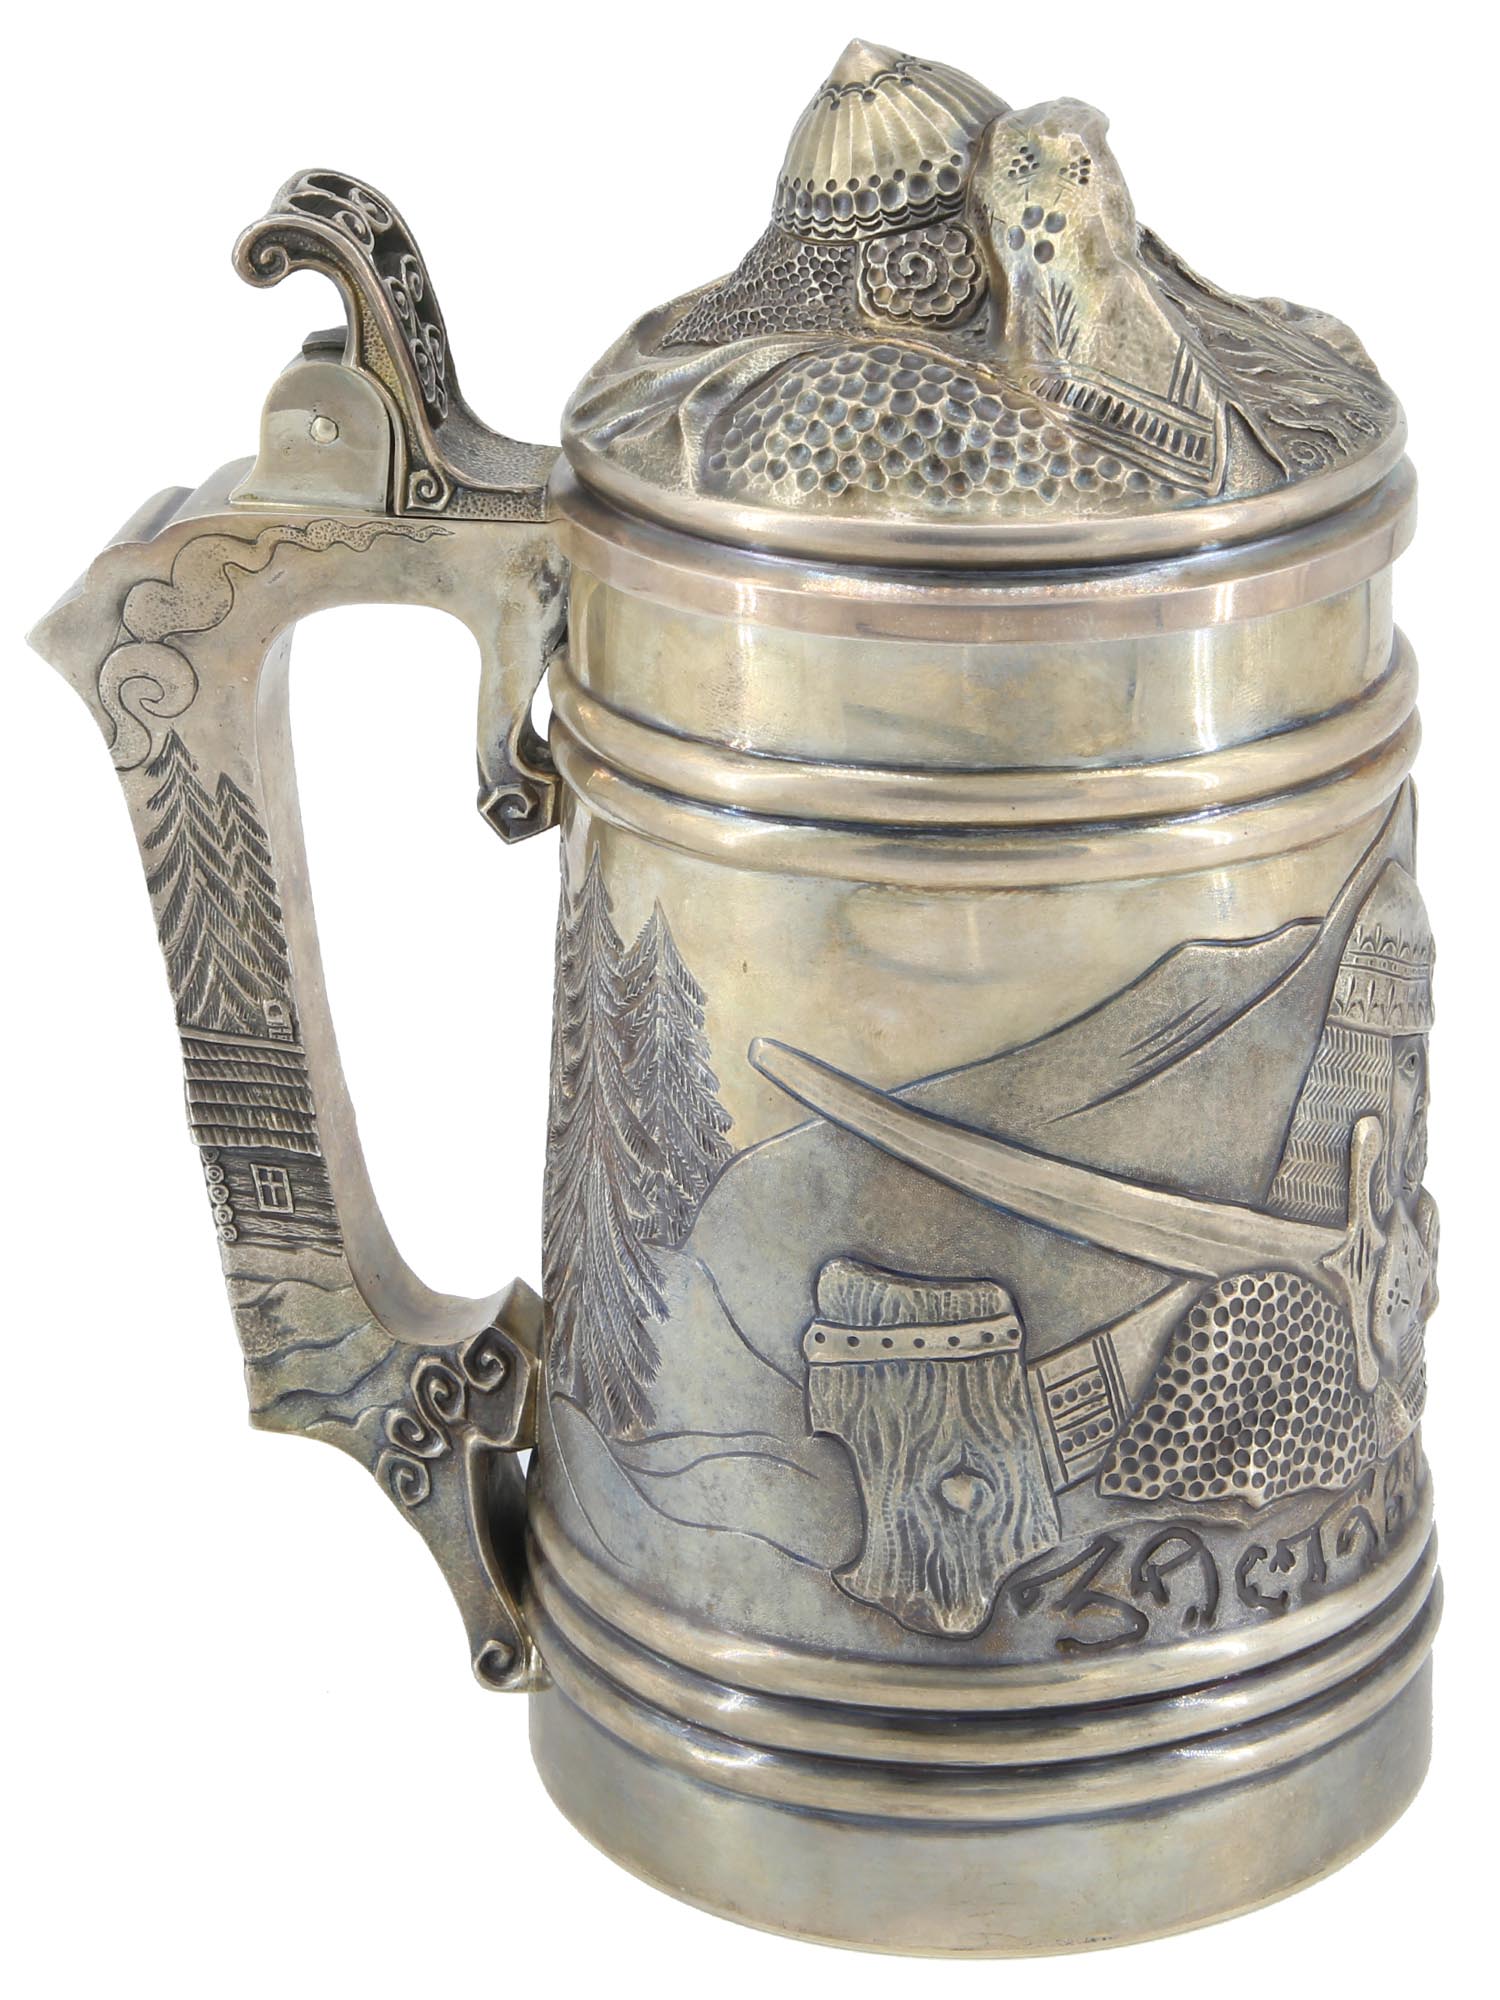 A RUSSIAN SILVER GILT BEER STEIN WITH BOGATYRS PIC-0